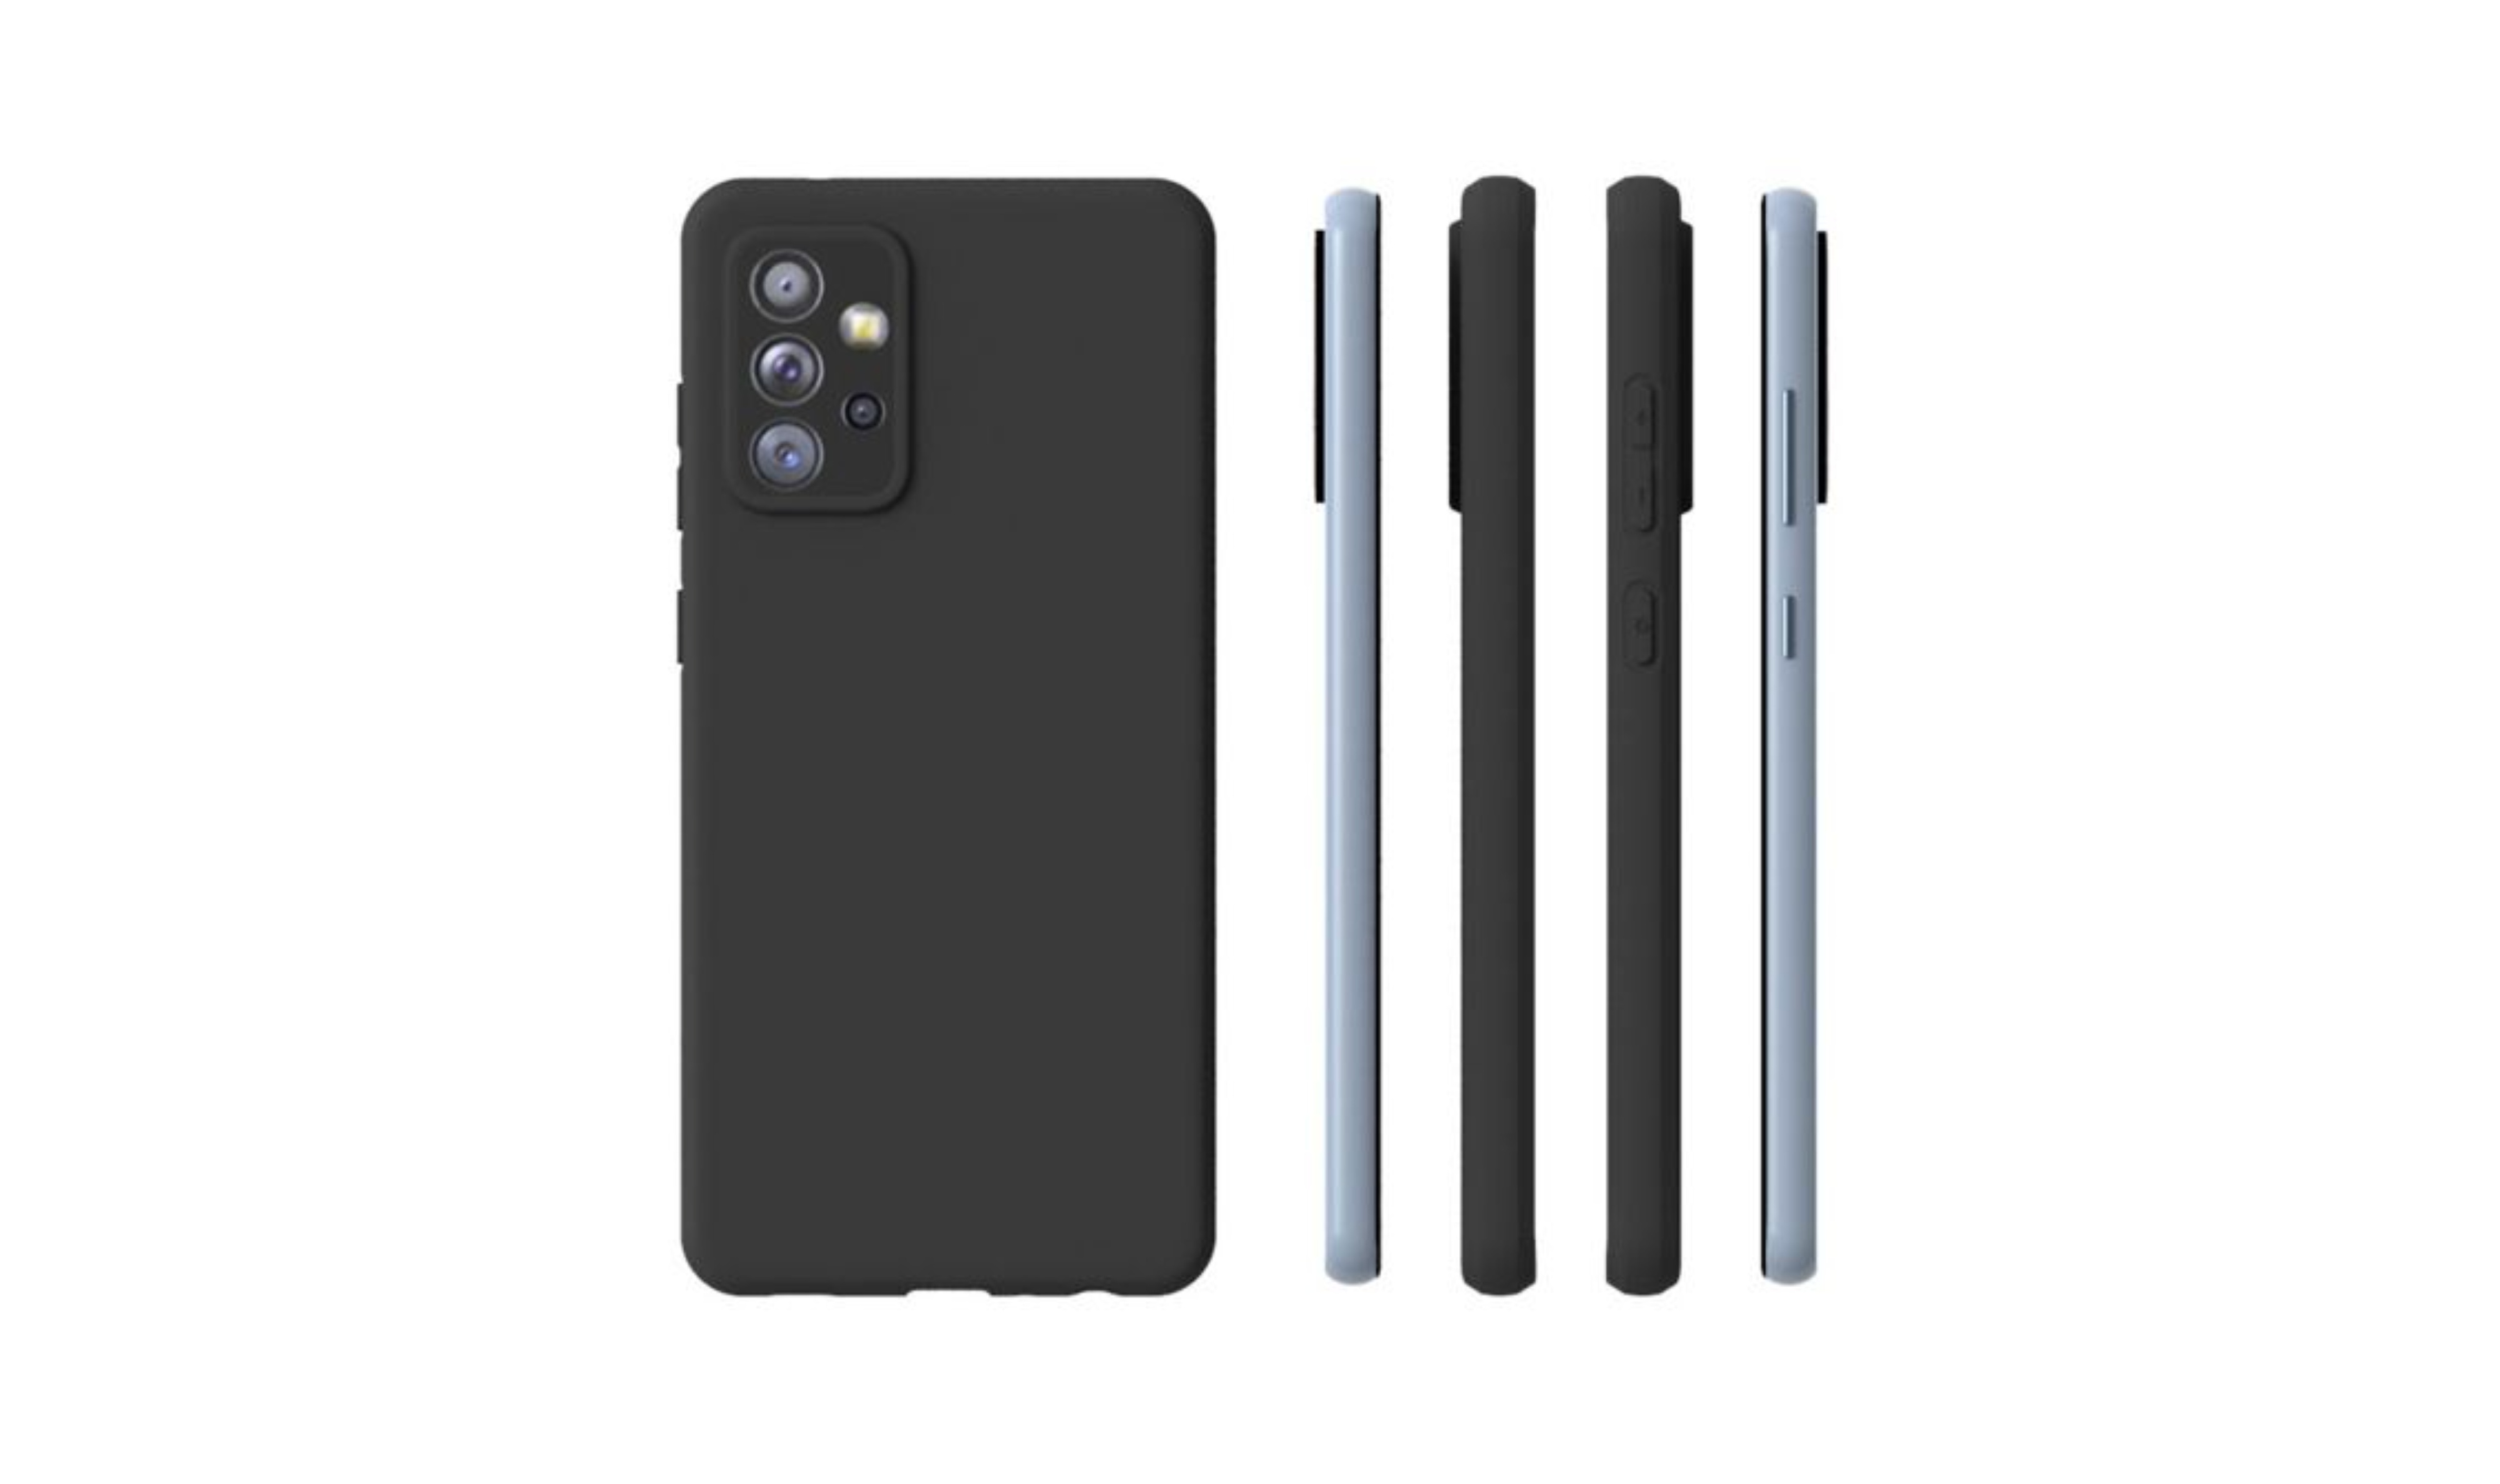 Samsung Galaxy A72 5G Case Renders Featured